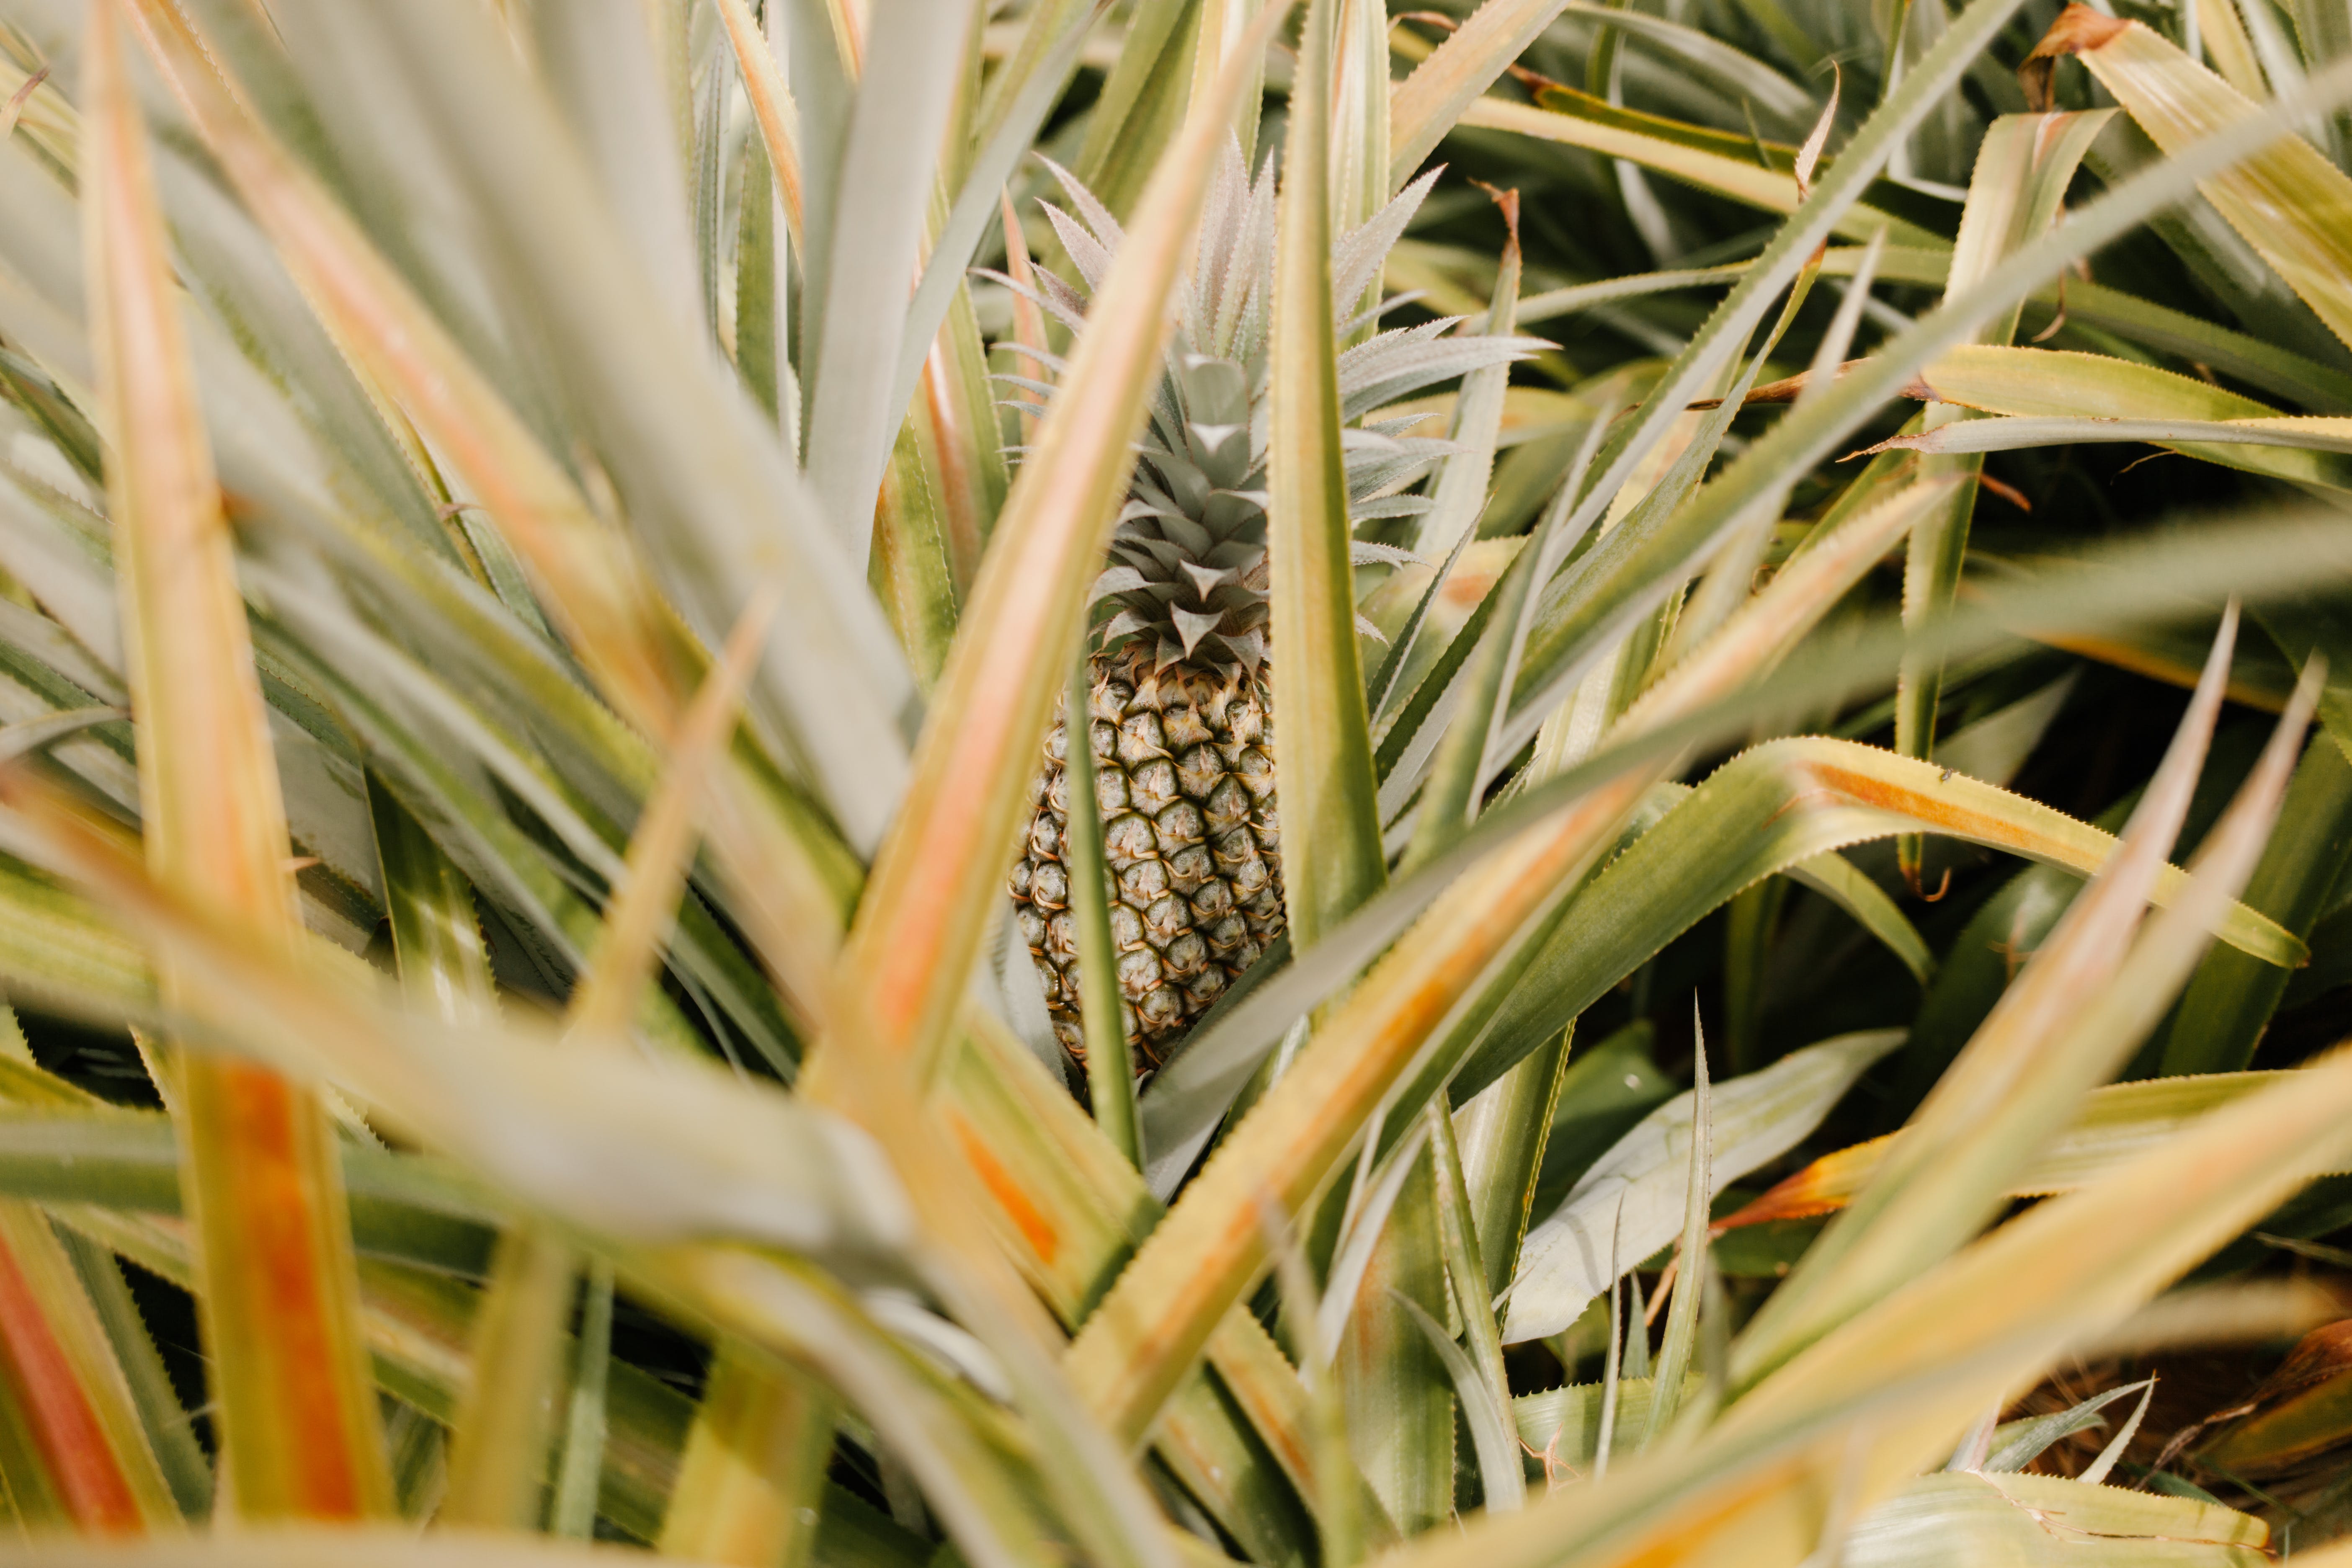 Fruits you can farm or grow in a greenhouse:  Pineapples